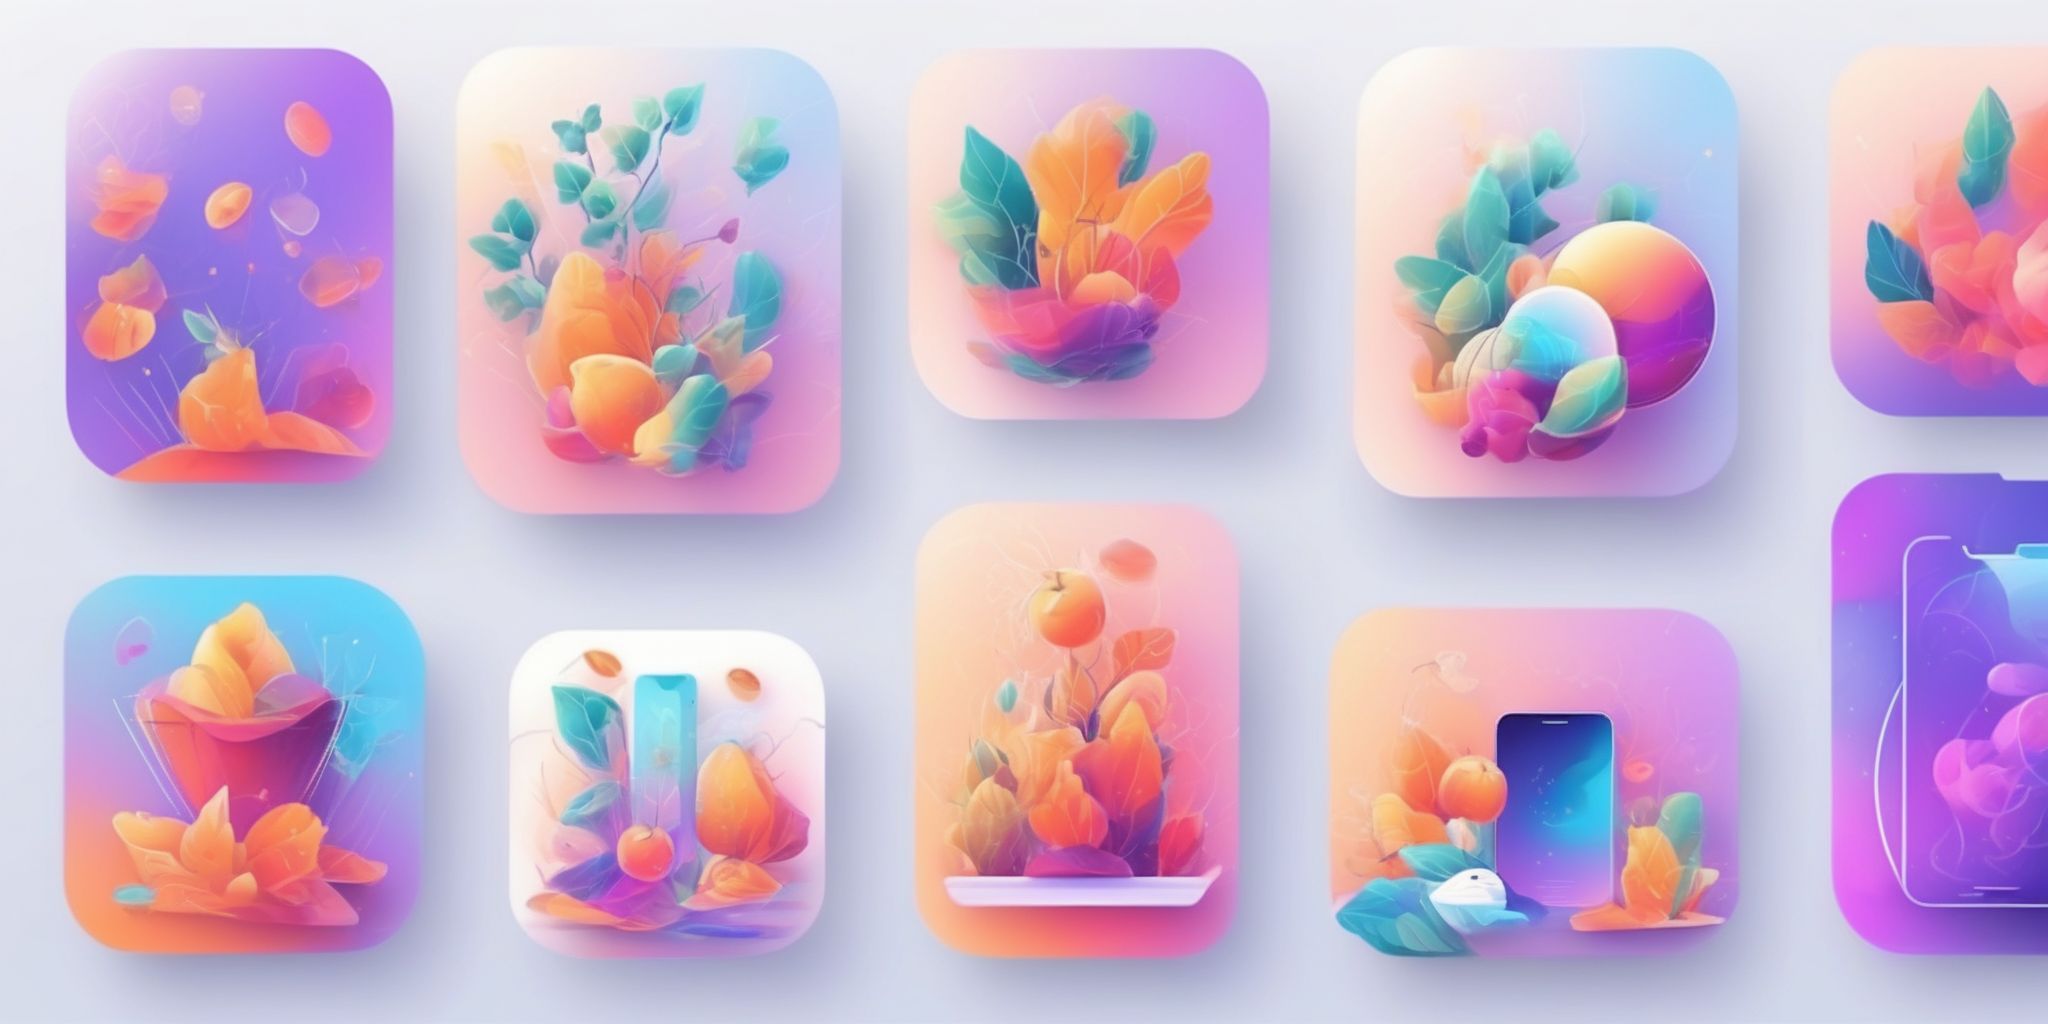 Apps in illustration style with gradients and white background